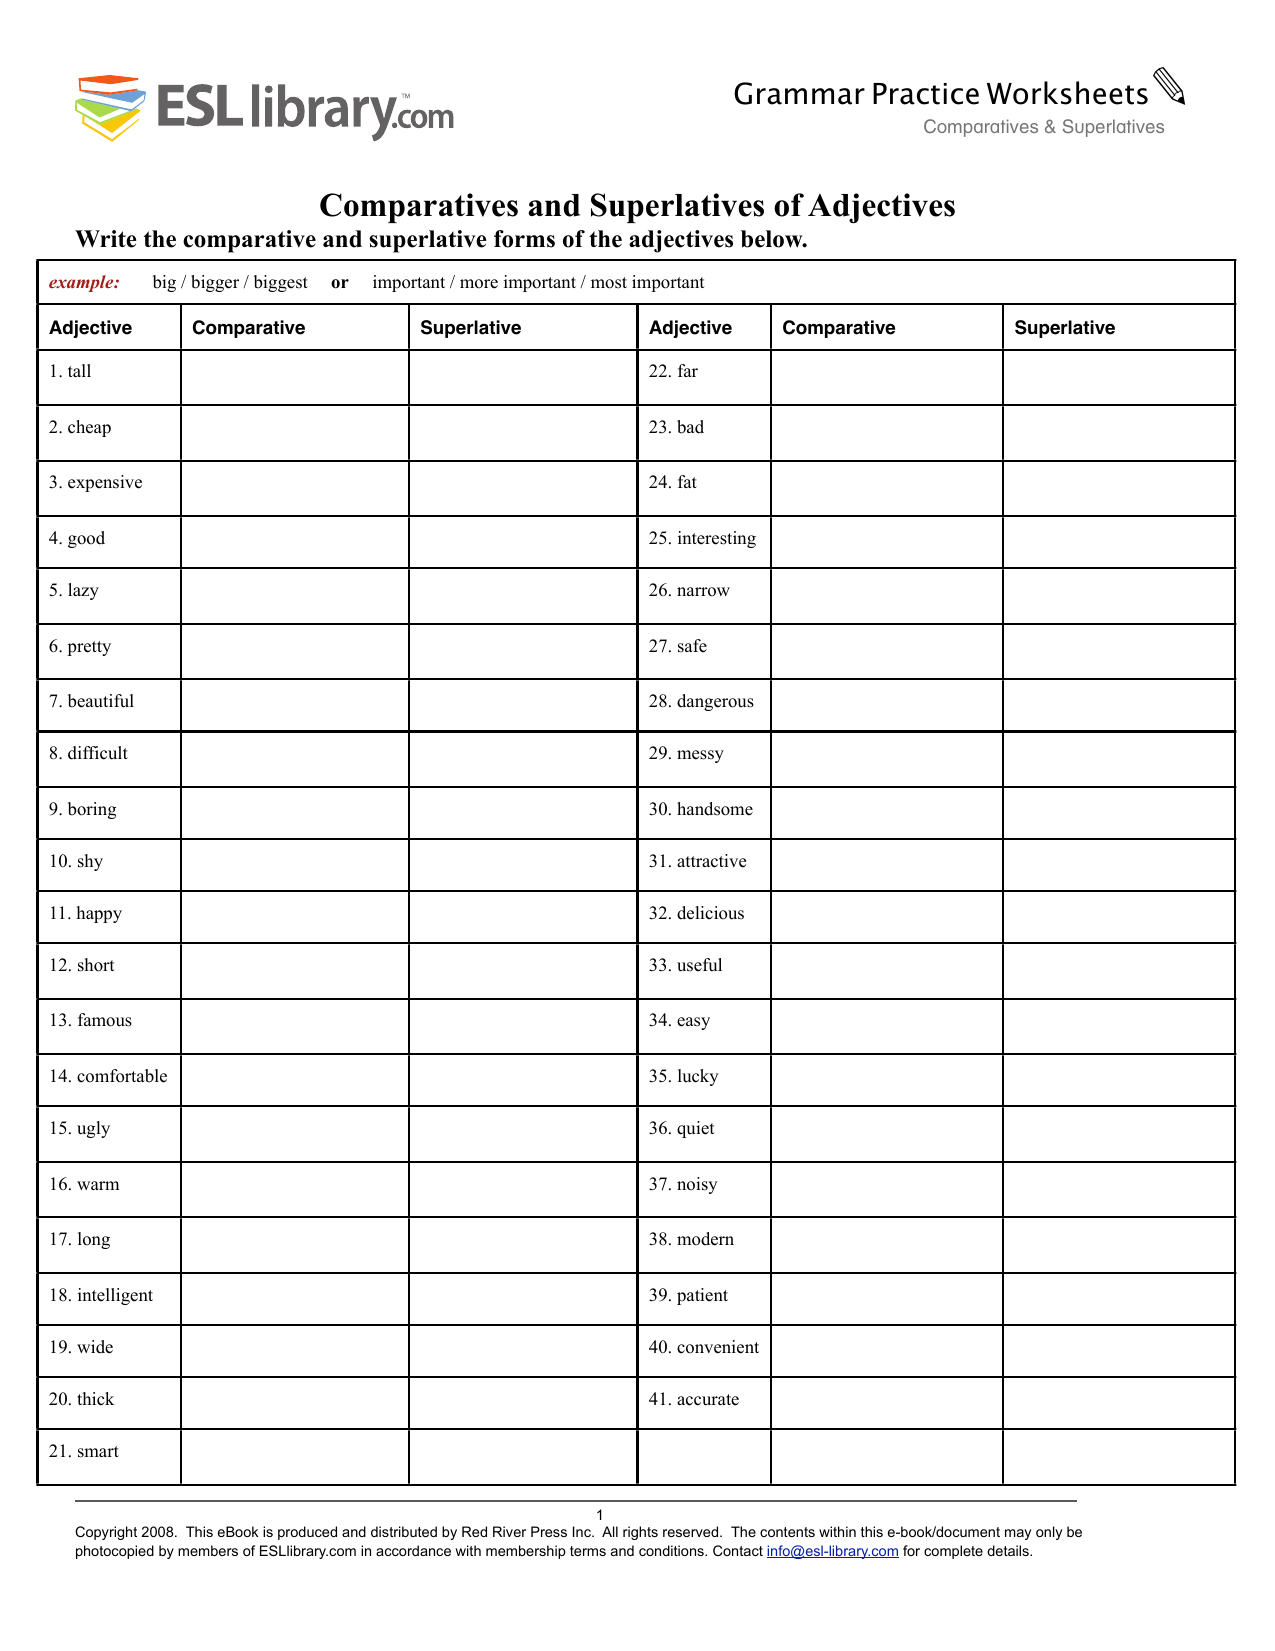 Comparatives Superlatives Worksheet With Answers 1